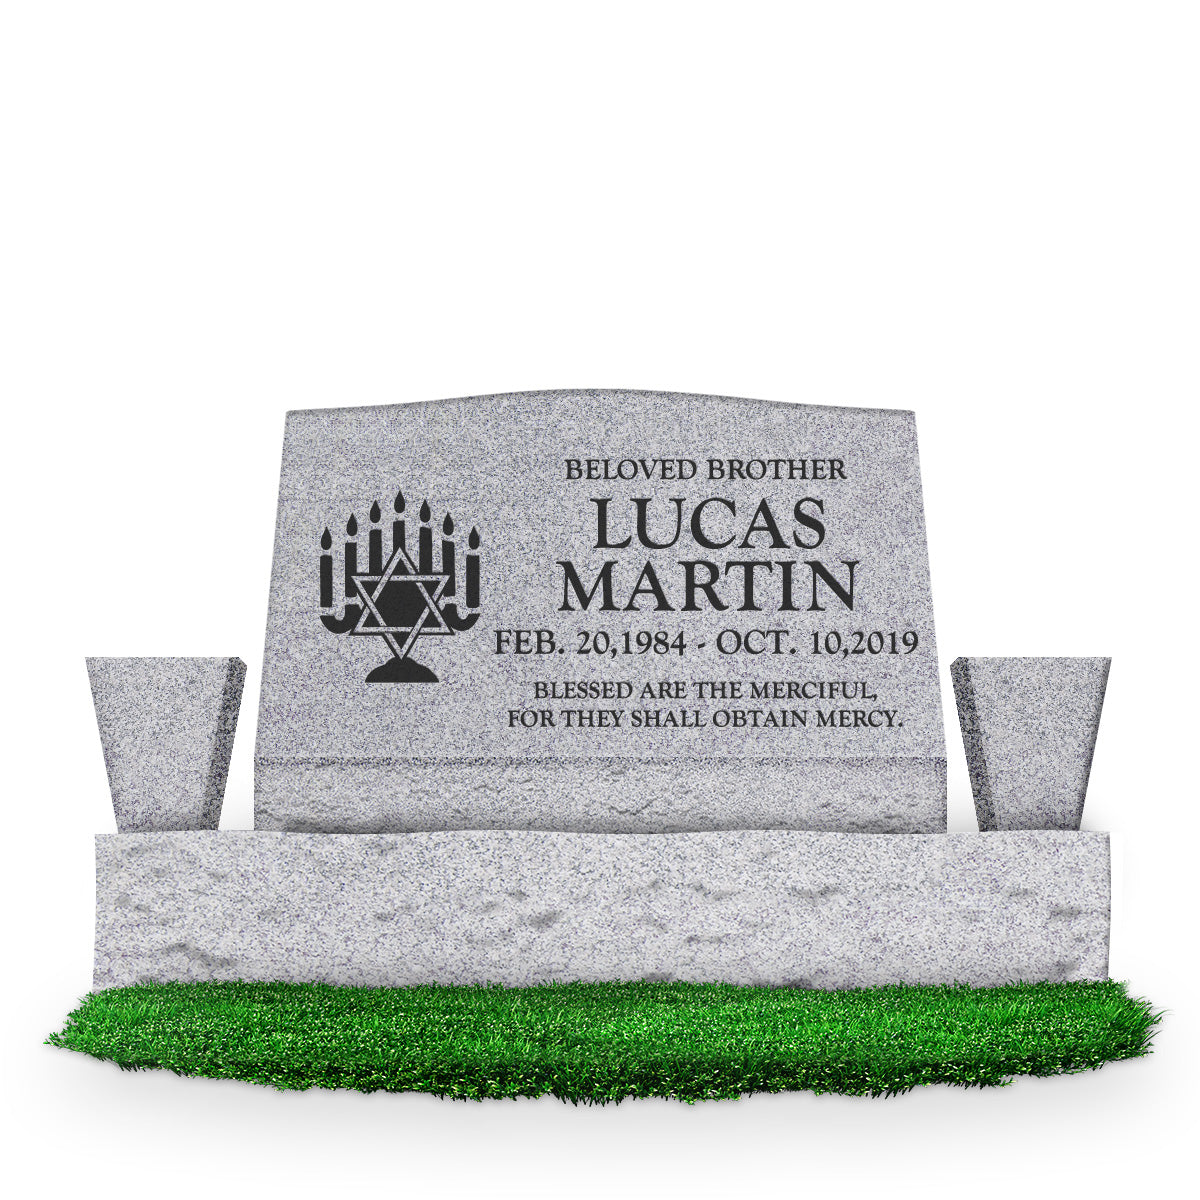 30″ x 10″ x 16″ Serp Top Slant Headstone: polished front and back; 42″ base; two square tapered vases; Single/Artwork